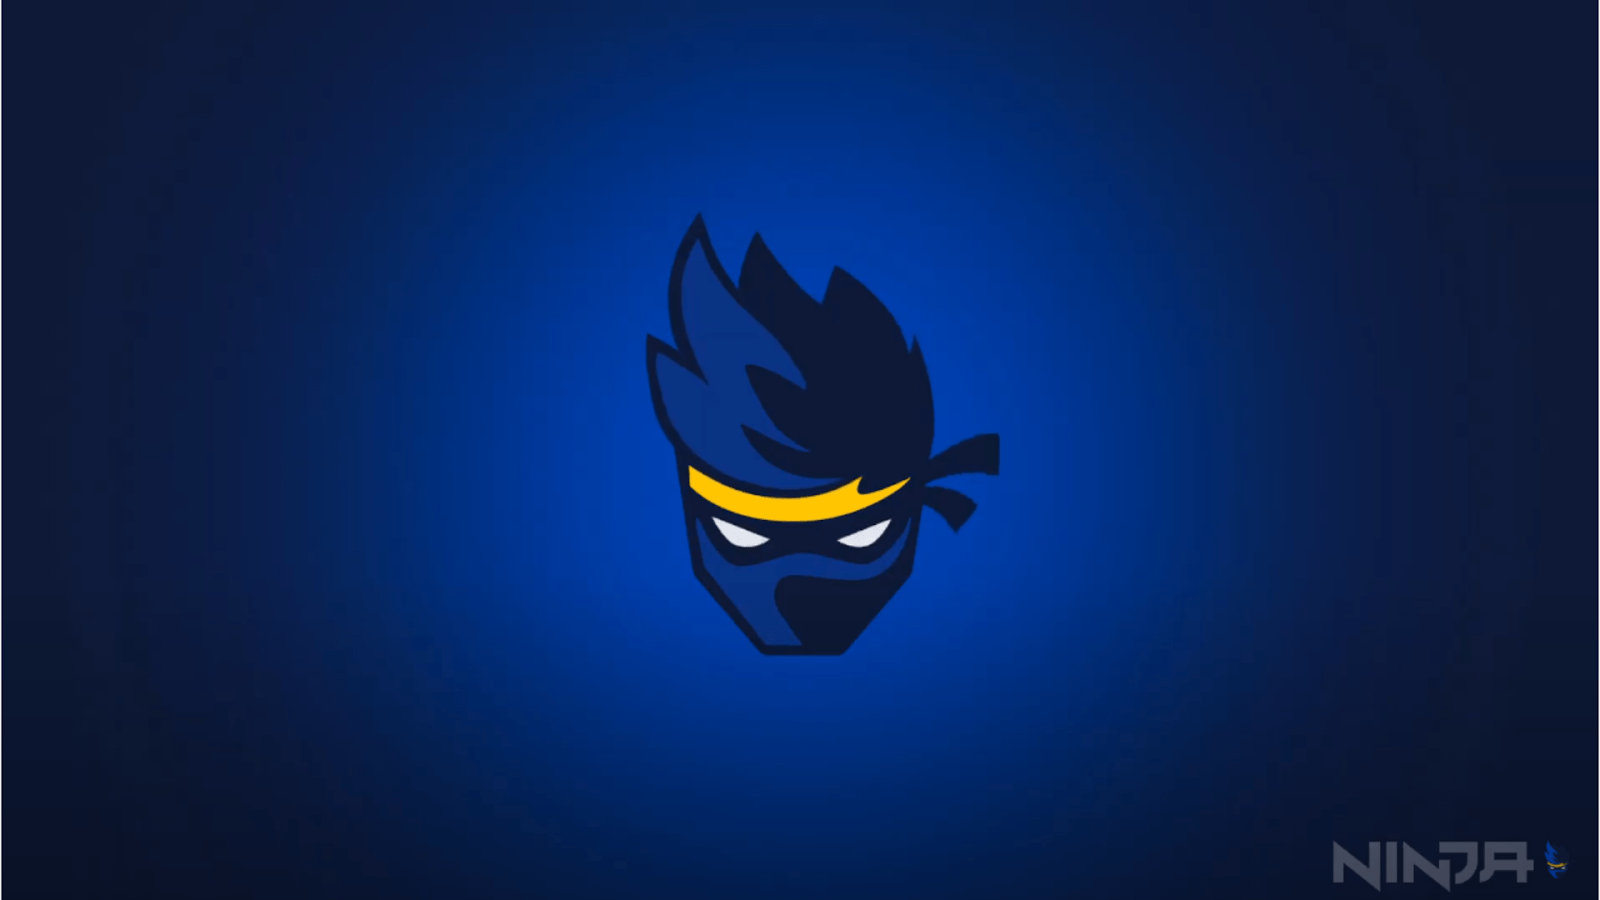 Fortnite: Ninja Now Streaming On YouTube, No Exclusive Deal Signed Yet